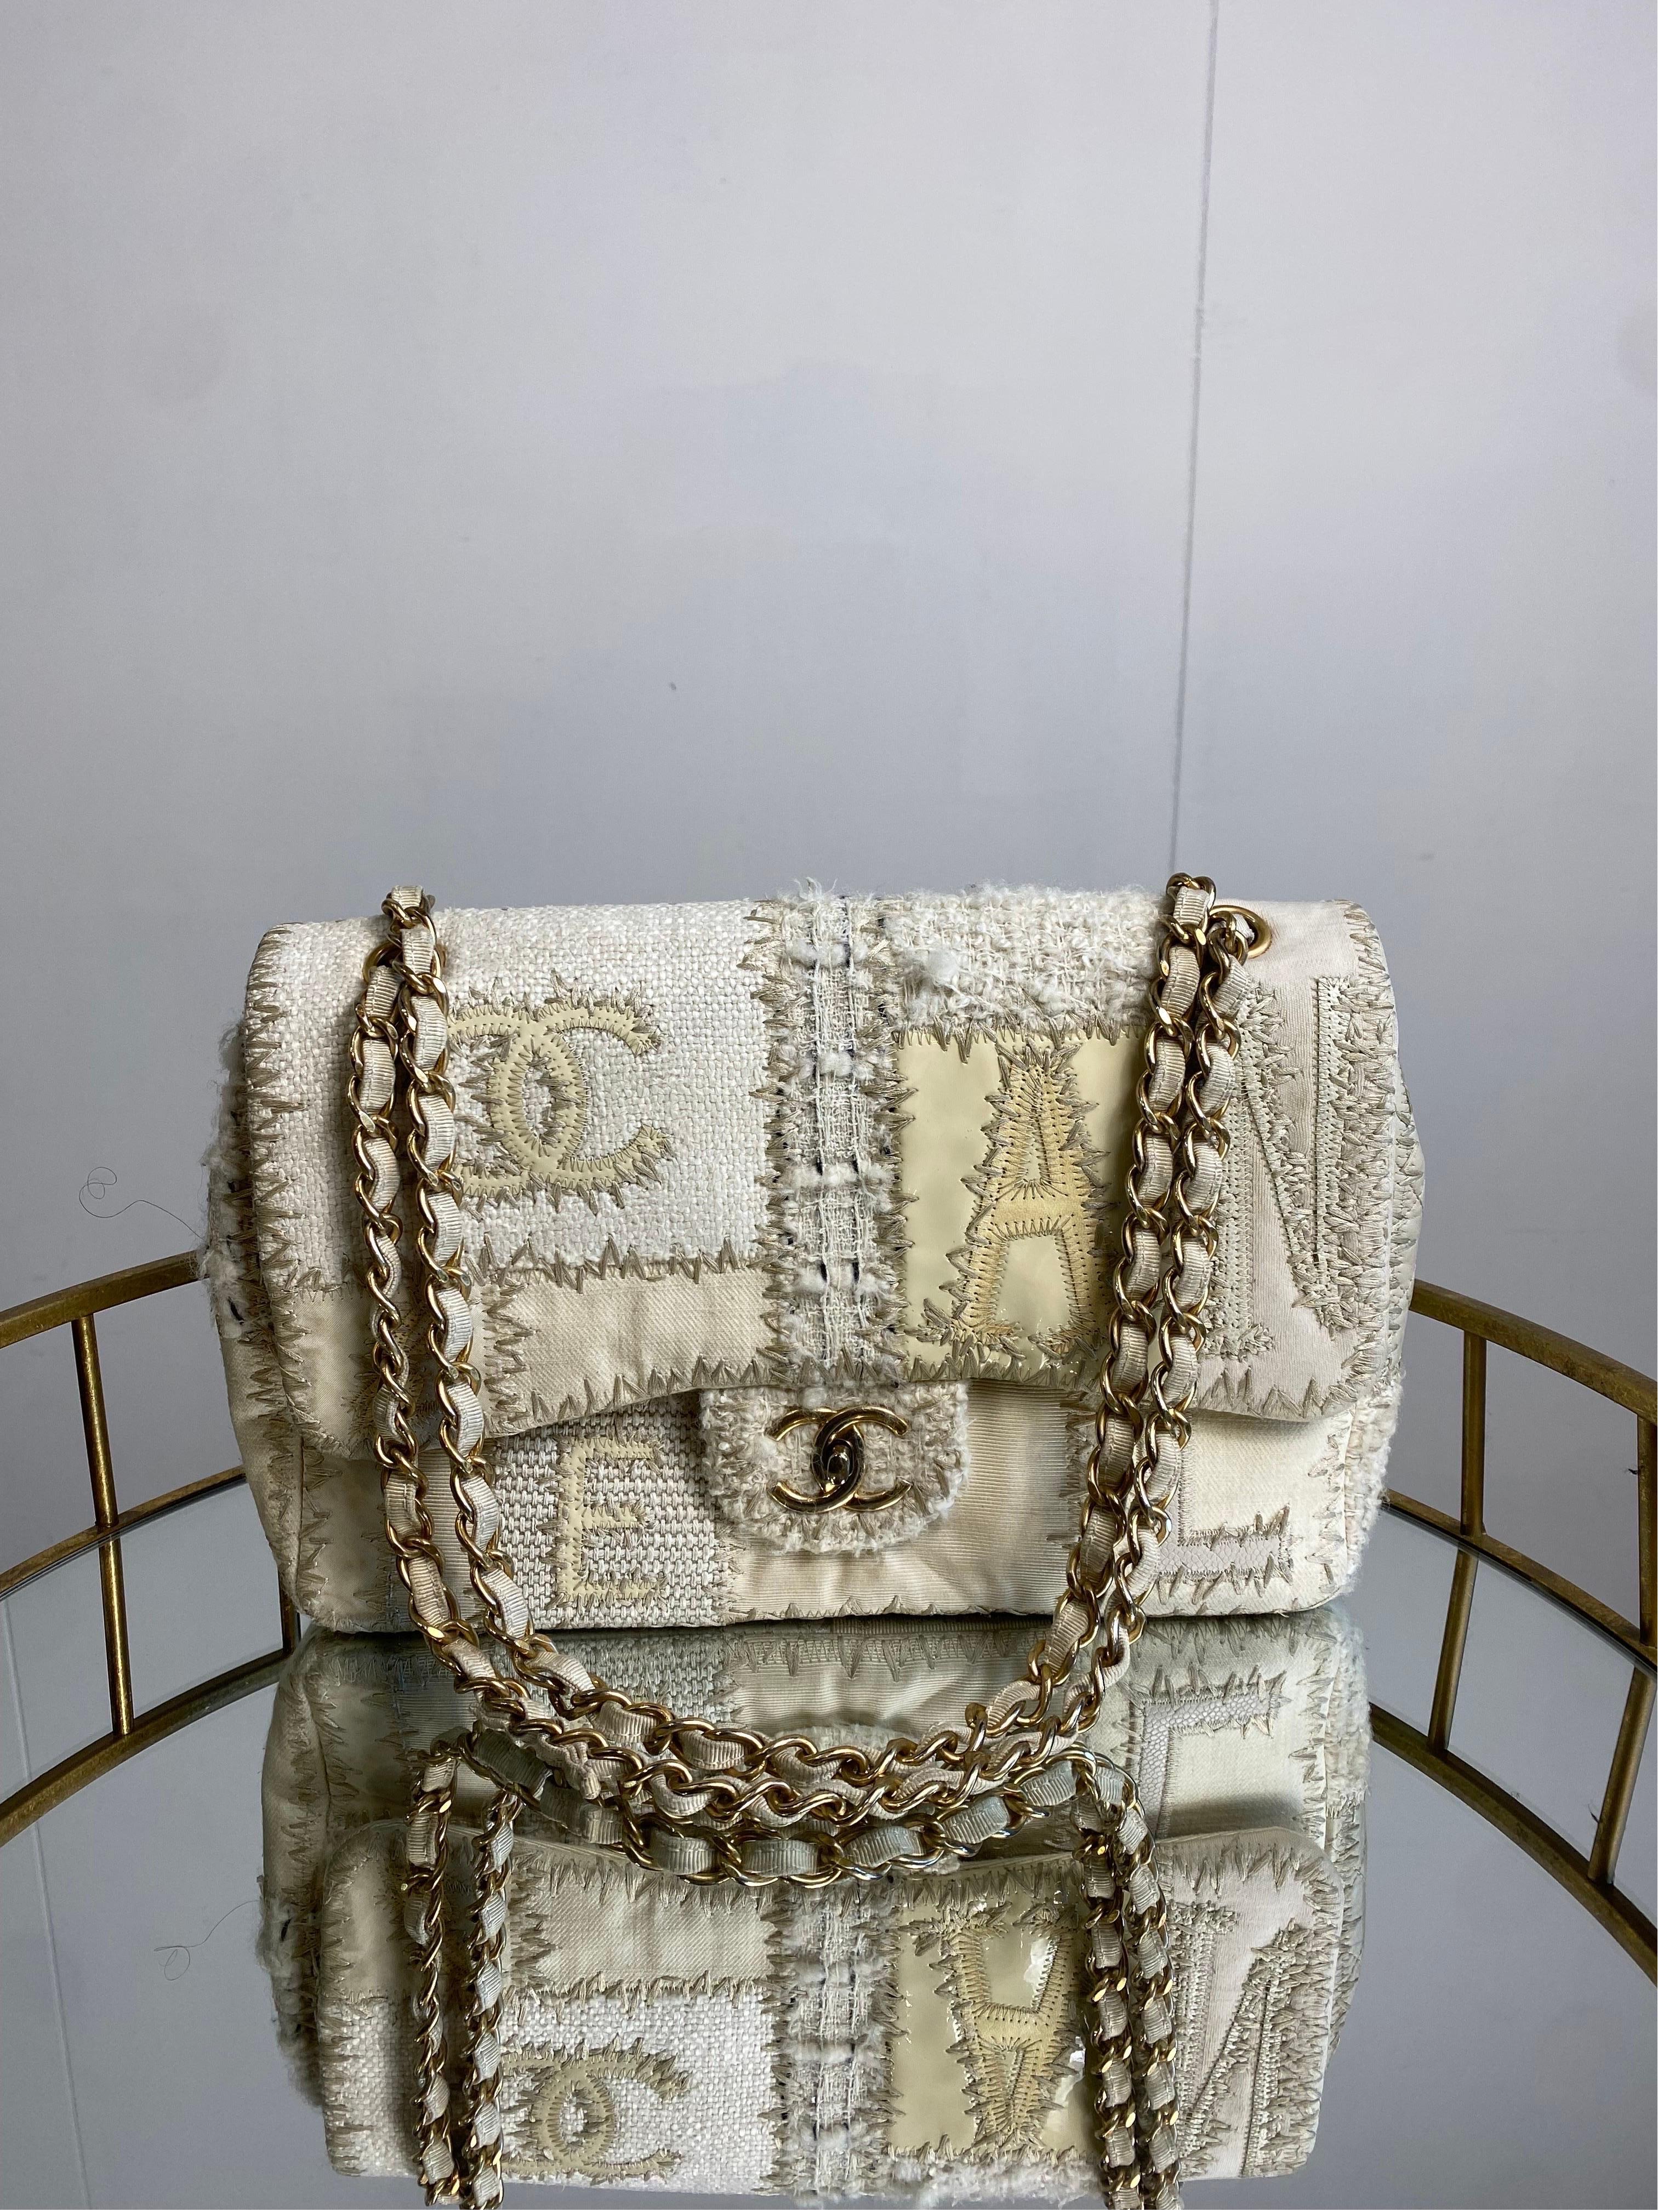 Chanel Jumbo Limited Edition Patchwork Bag In Good Condition For Sale In Carnate, IT